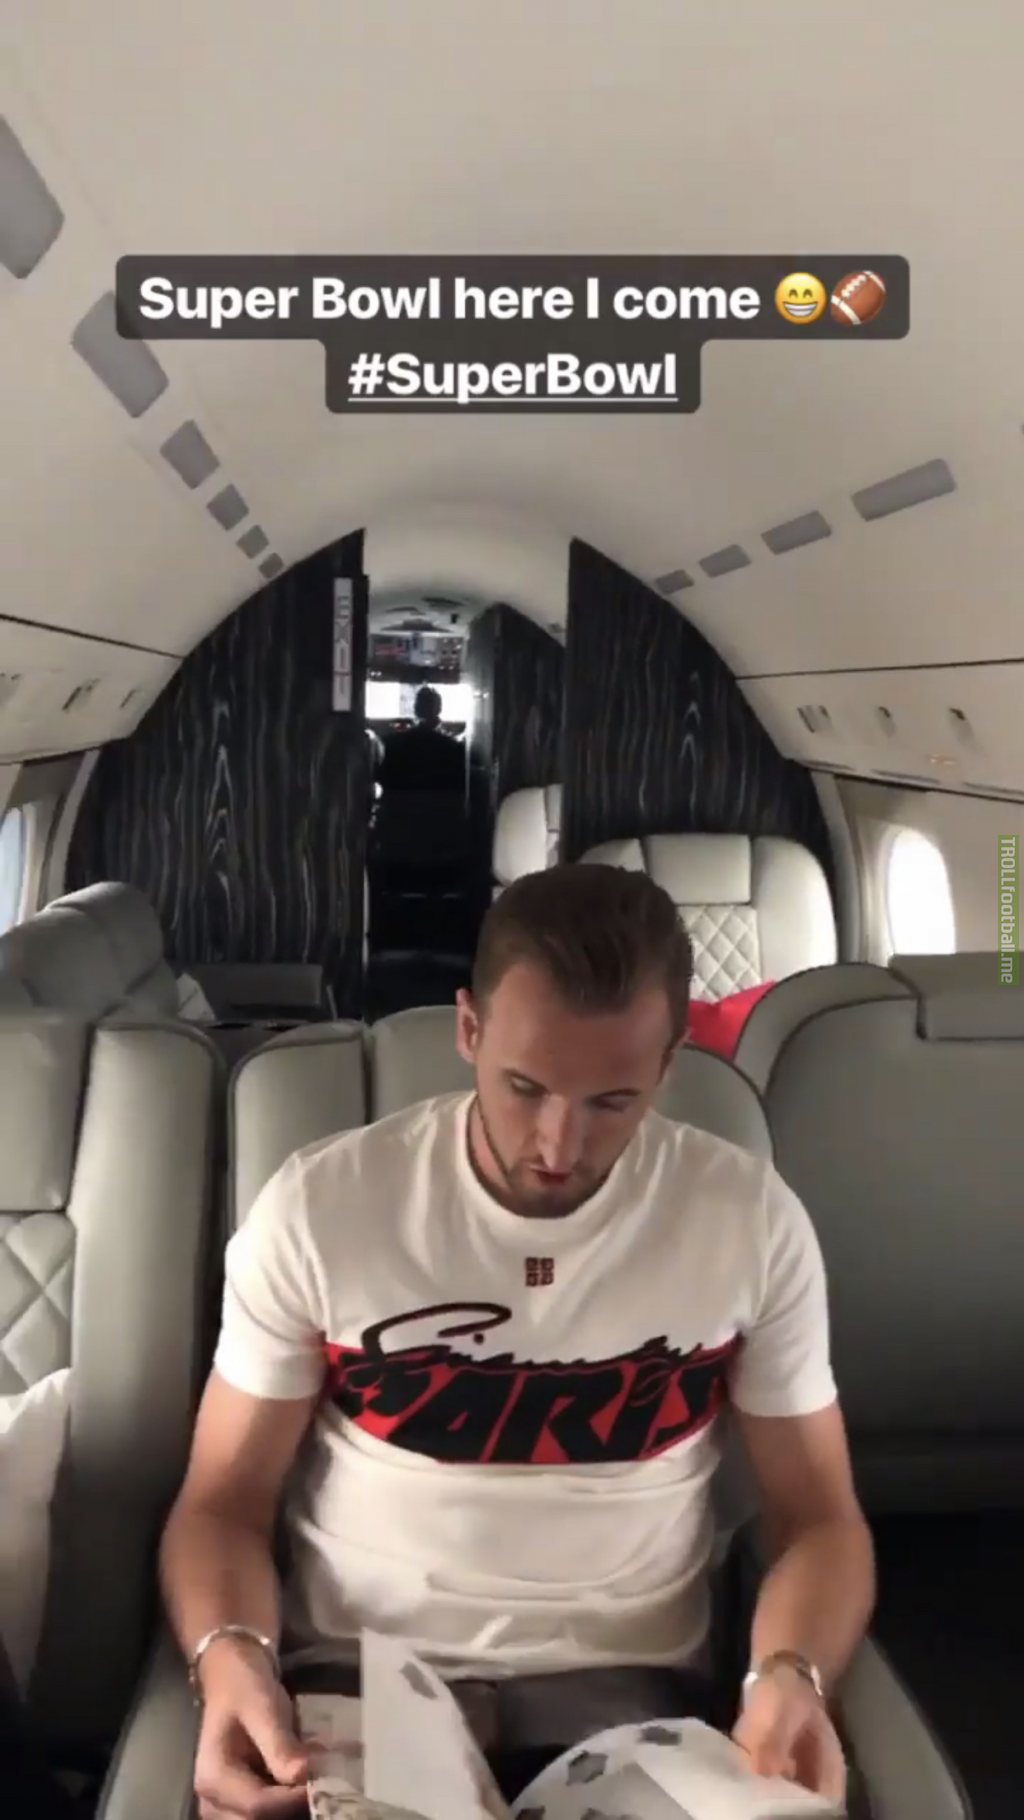 Harry Kane on his way to one cup final this season